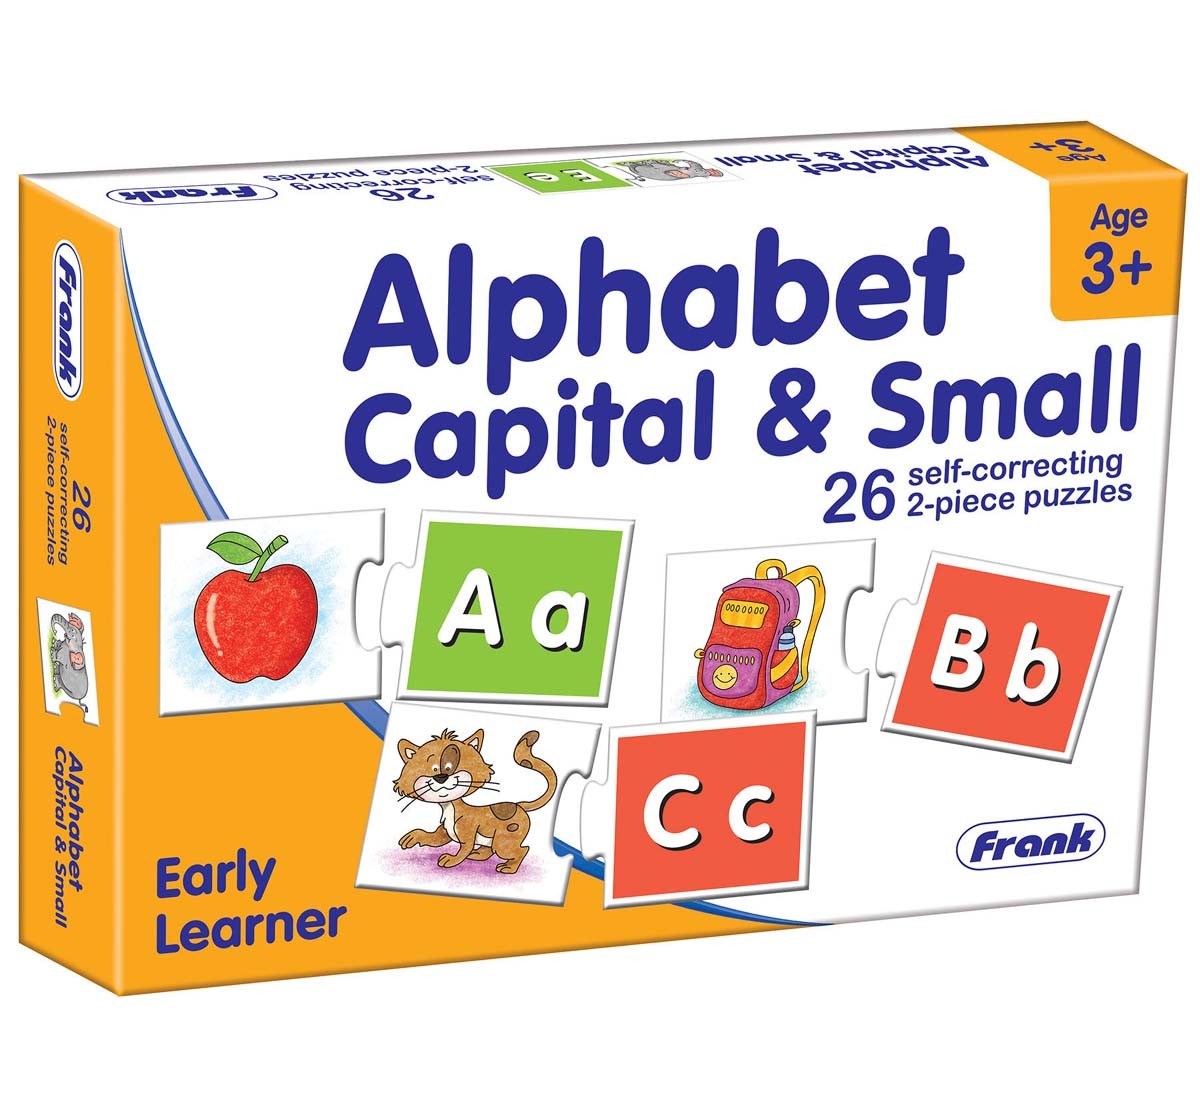 Frank Alphabet Capital & Small Puzzle Puzzles for Kids Age 3Y+